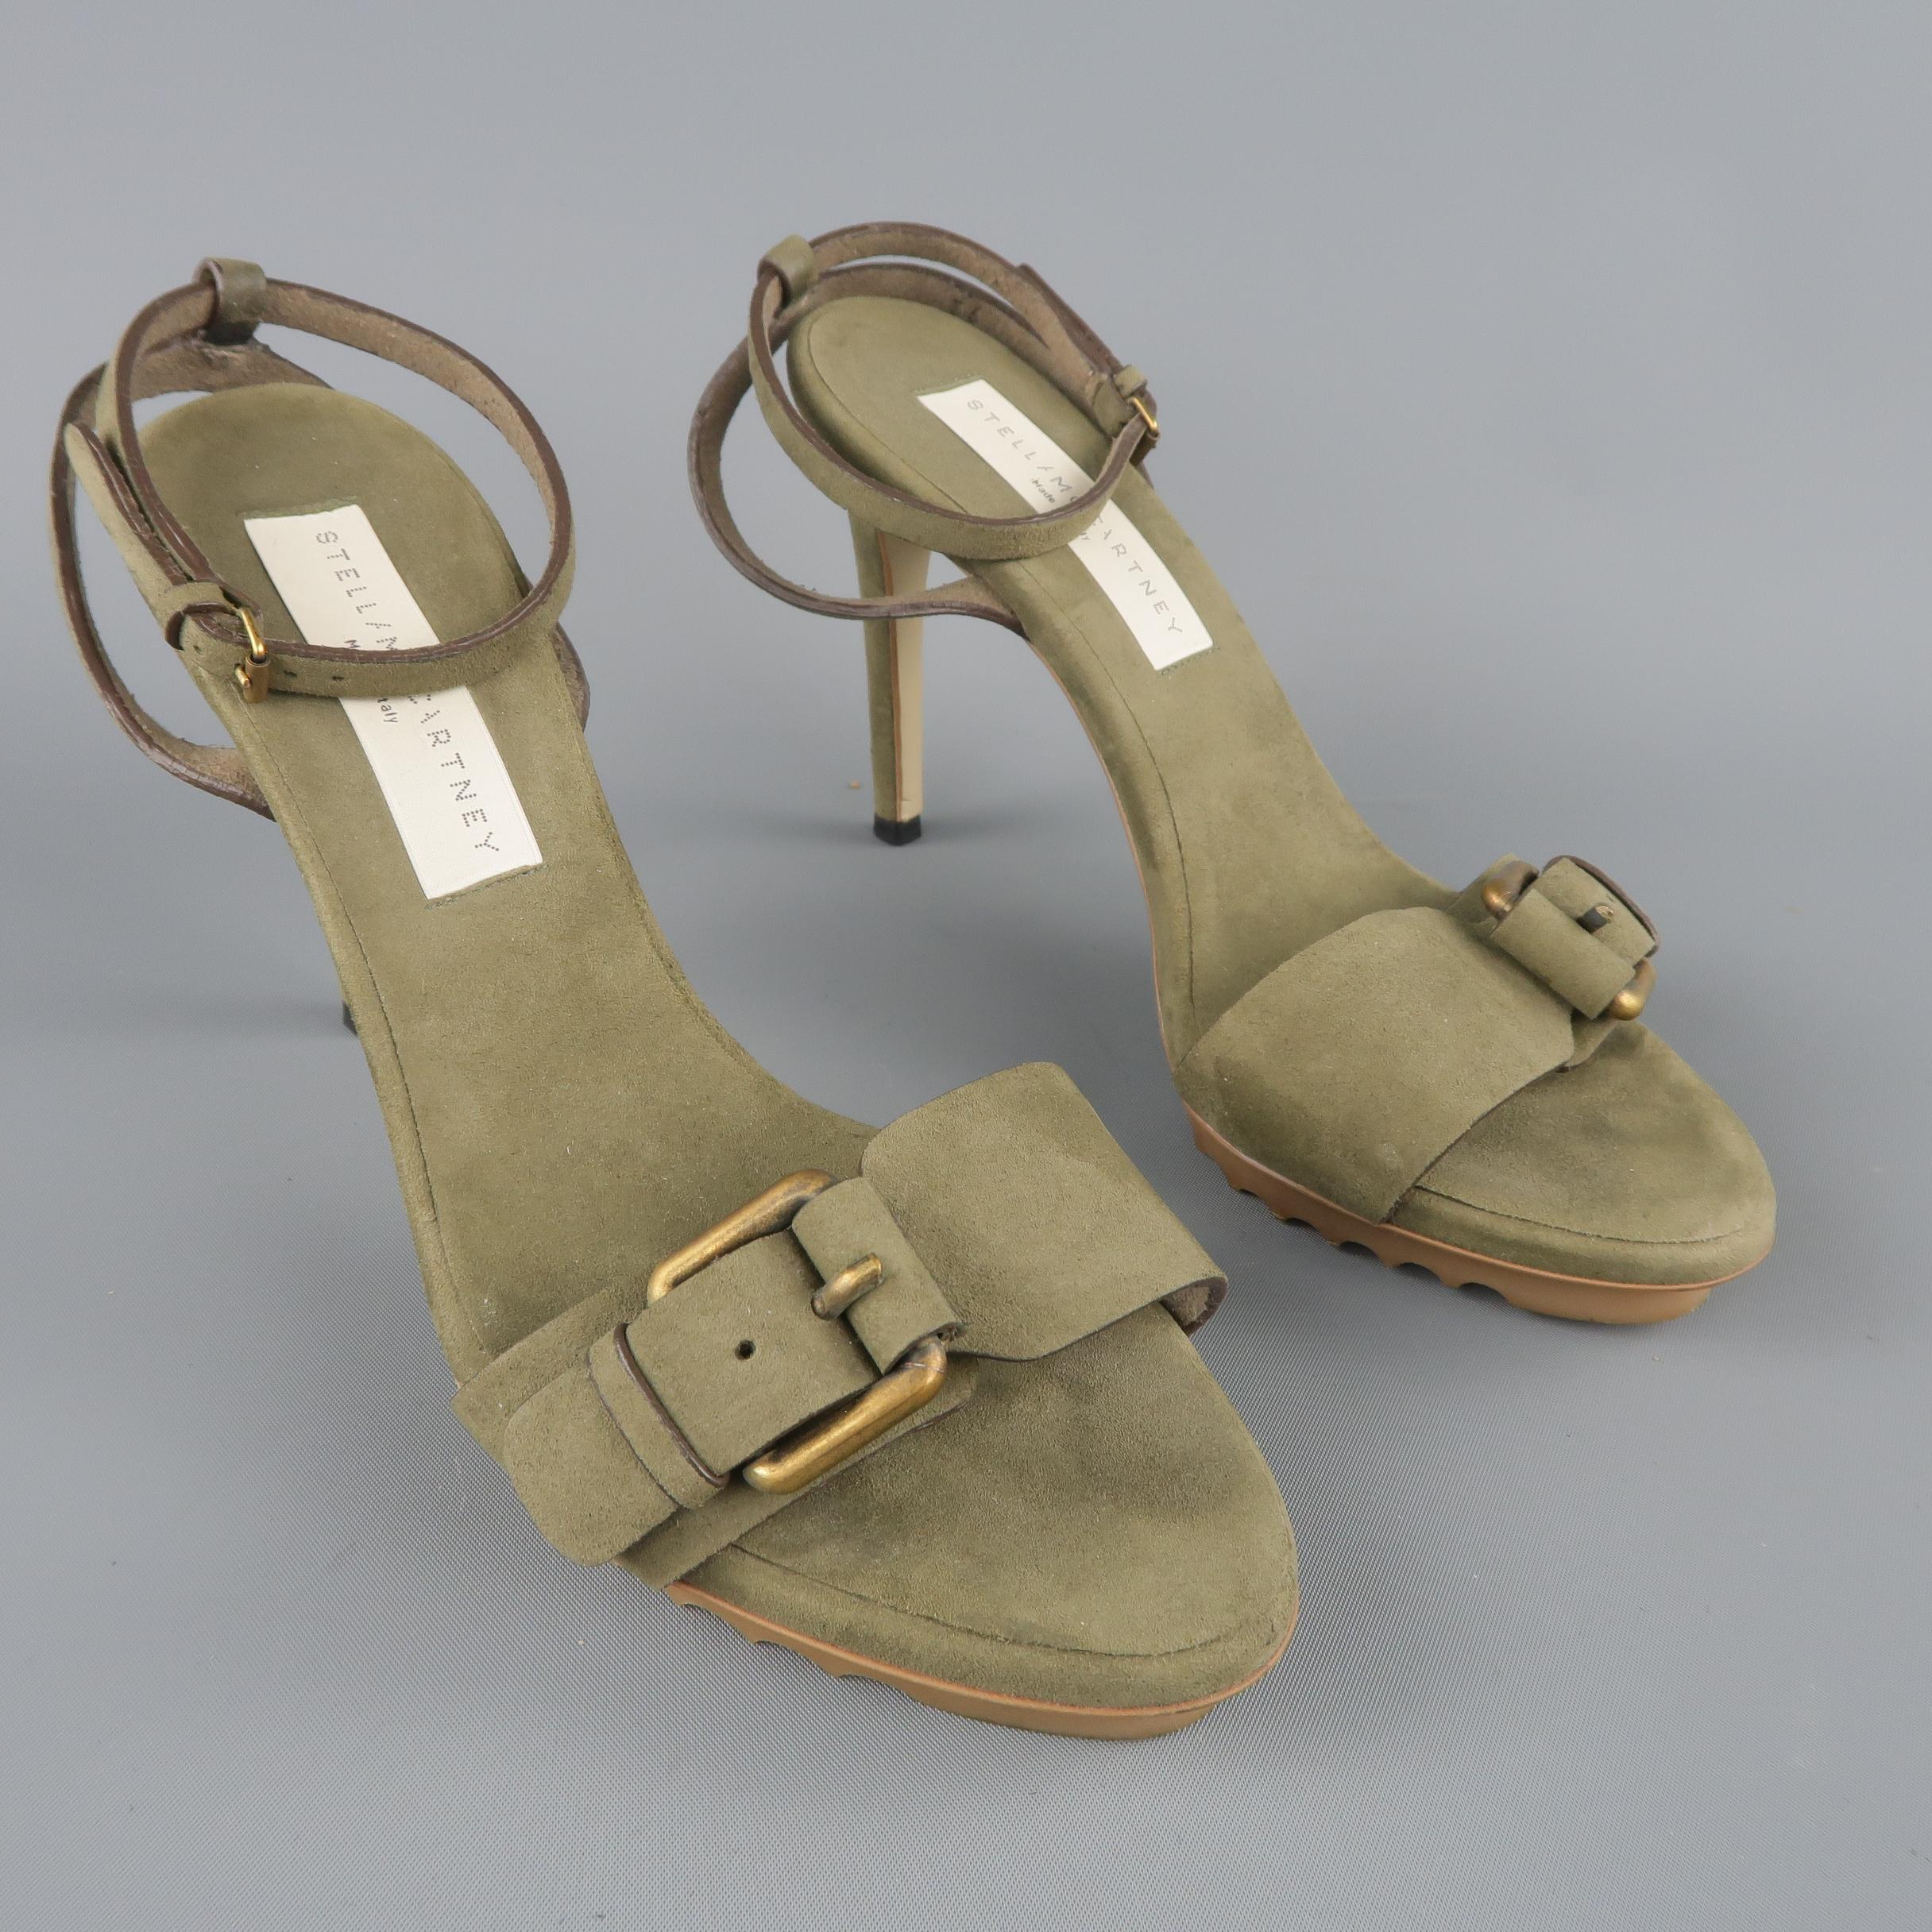 STELLA MCCARTNEY sandals come in olive green vegan suede with a thick gold tone buckle toe strap, rubber commando platform, covered heel, and wrapped ankle strap. Wear throughout. As-is. Made in Italy.
 
Fair Pre-Owned Condition.
Marked: IT 36
